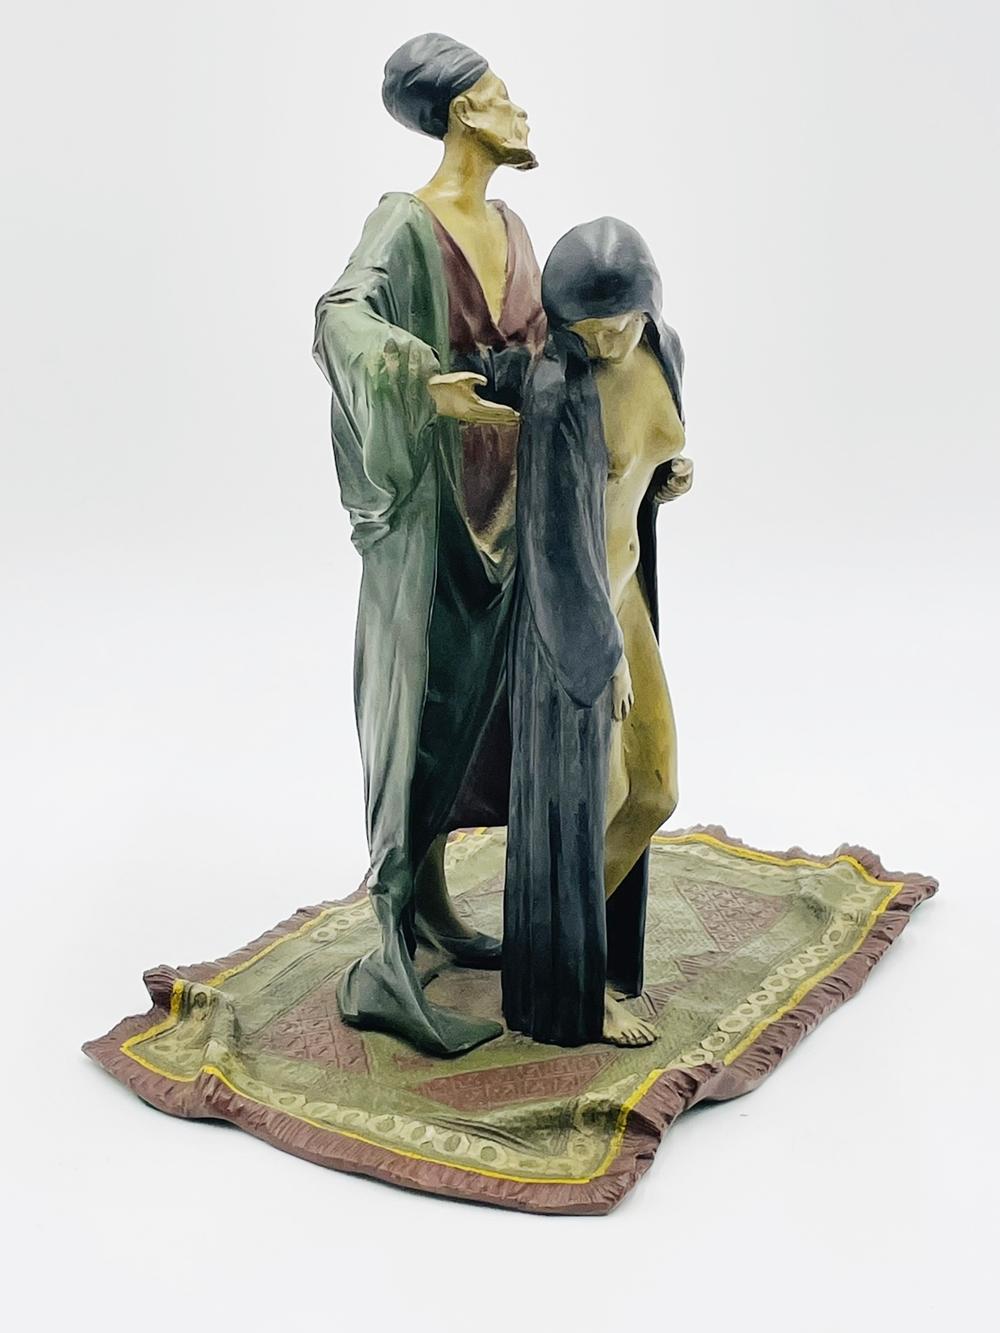 Sustantial bronze sculpture by Austrian artist Franz Bergman depicting a Man holding a nude female and standing on a rug.

Beautiful colors and attention to detail.

Signed.

Measurements:
11.25 inches high x 10 inches wide x 7 inches